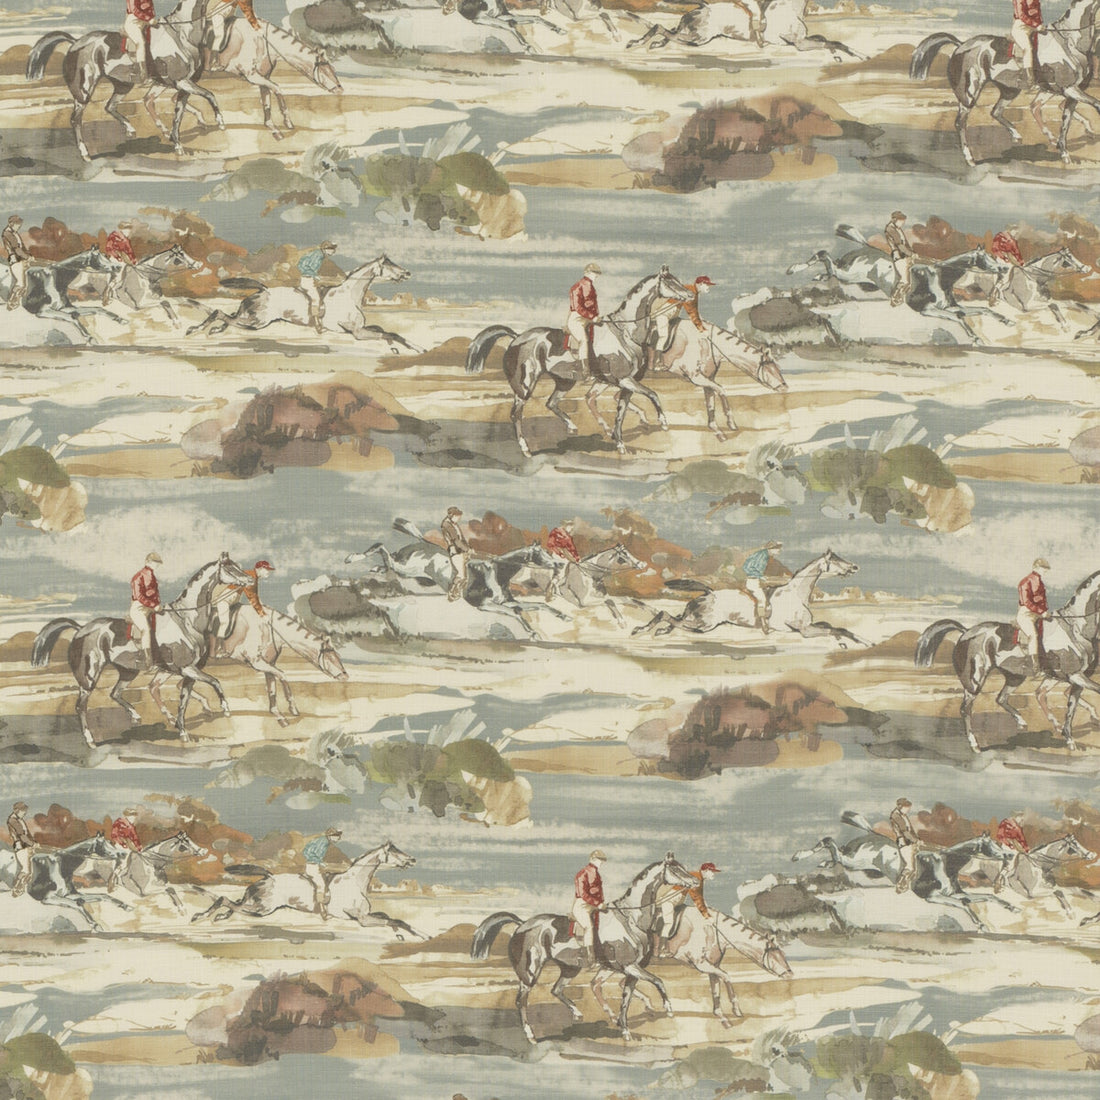 Morning Gallop Linen fabric in blue/sand color - pattern FD294.H57.0 - by Mulberry in the Icons Fabrics collection